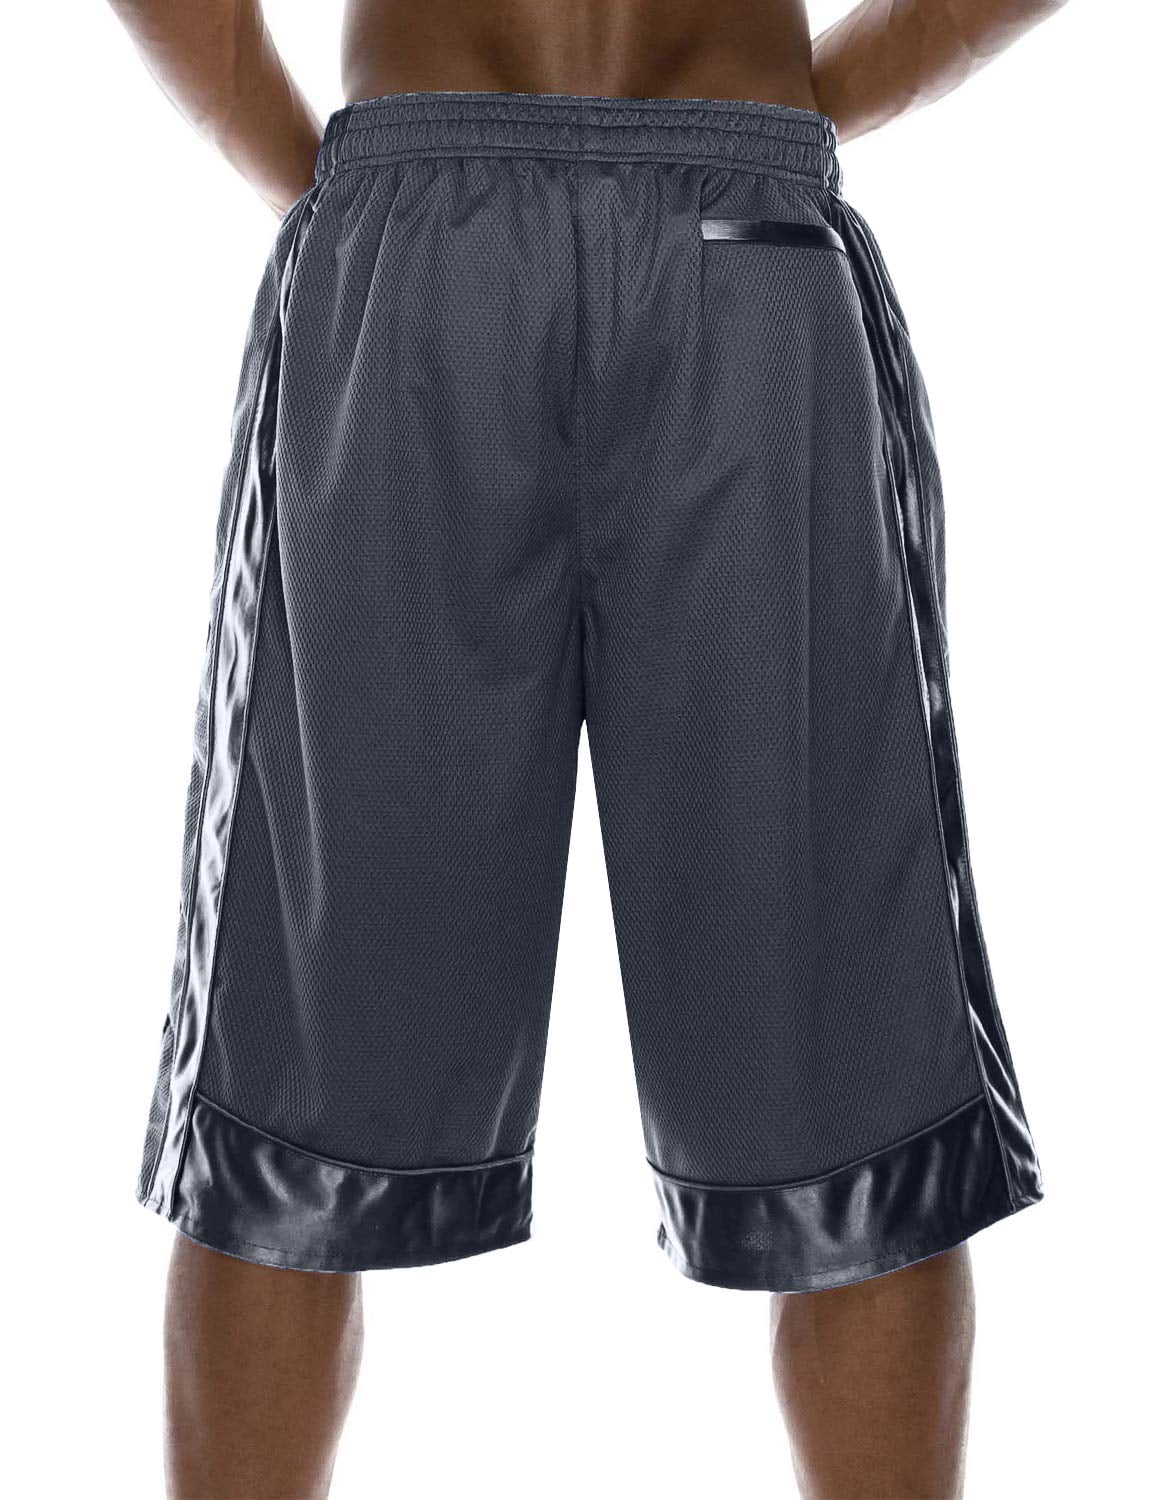 Premium Quality Heavy Mesh Basketball Shorts, Small, Charcoal Grey at   Men's Clothing store